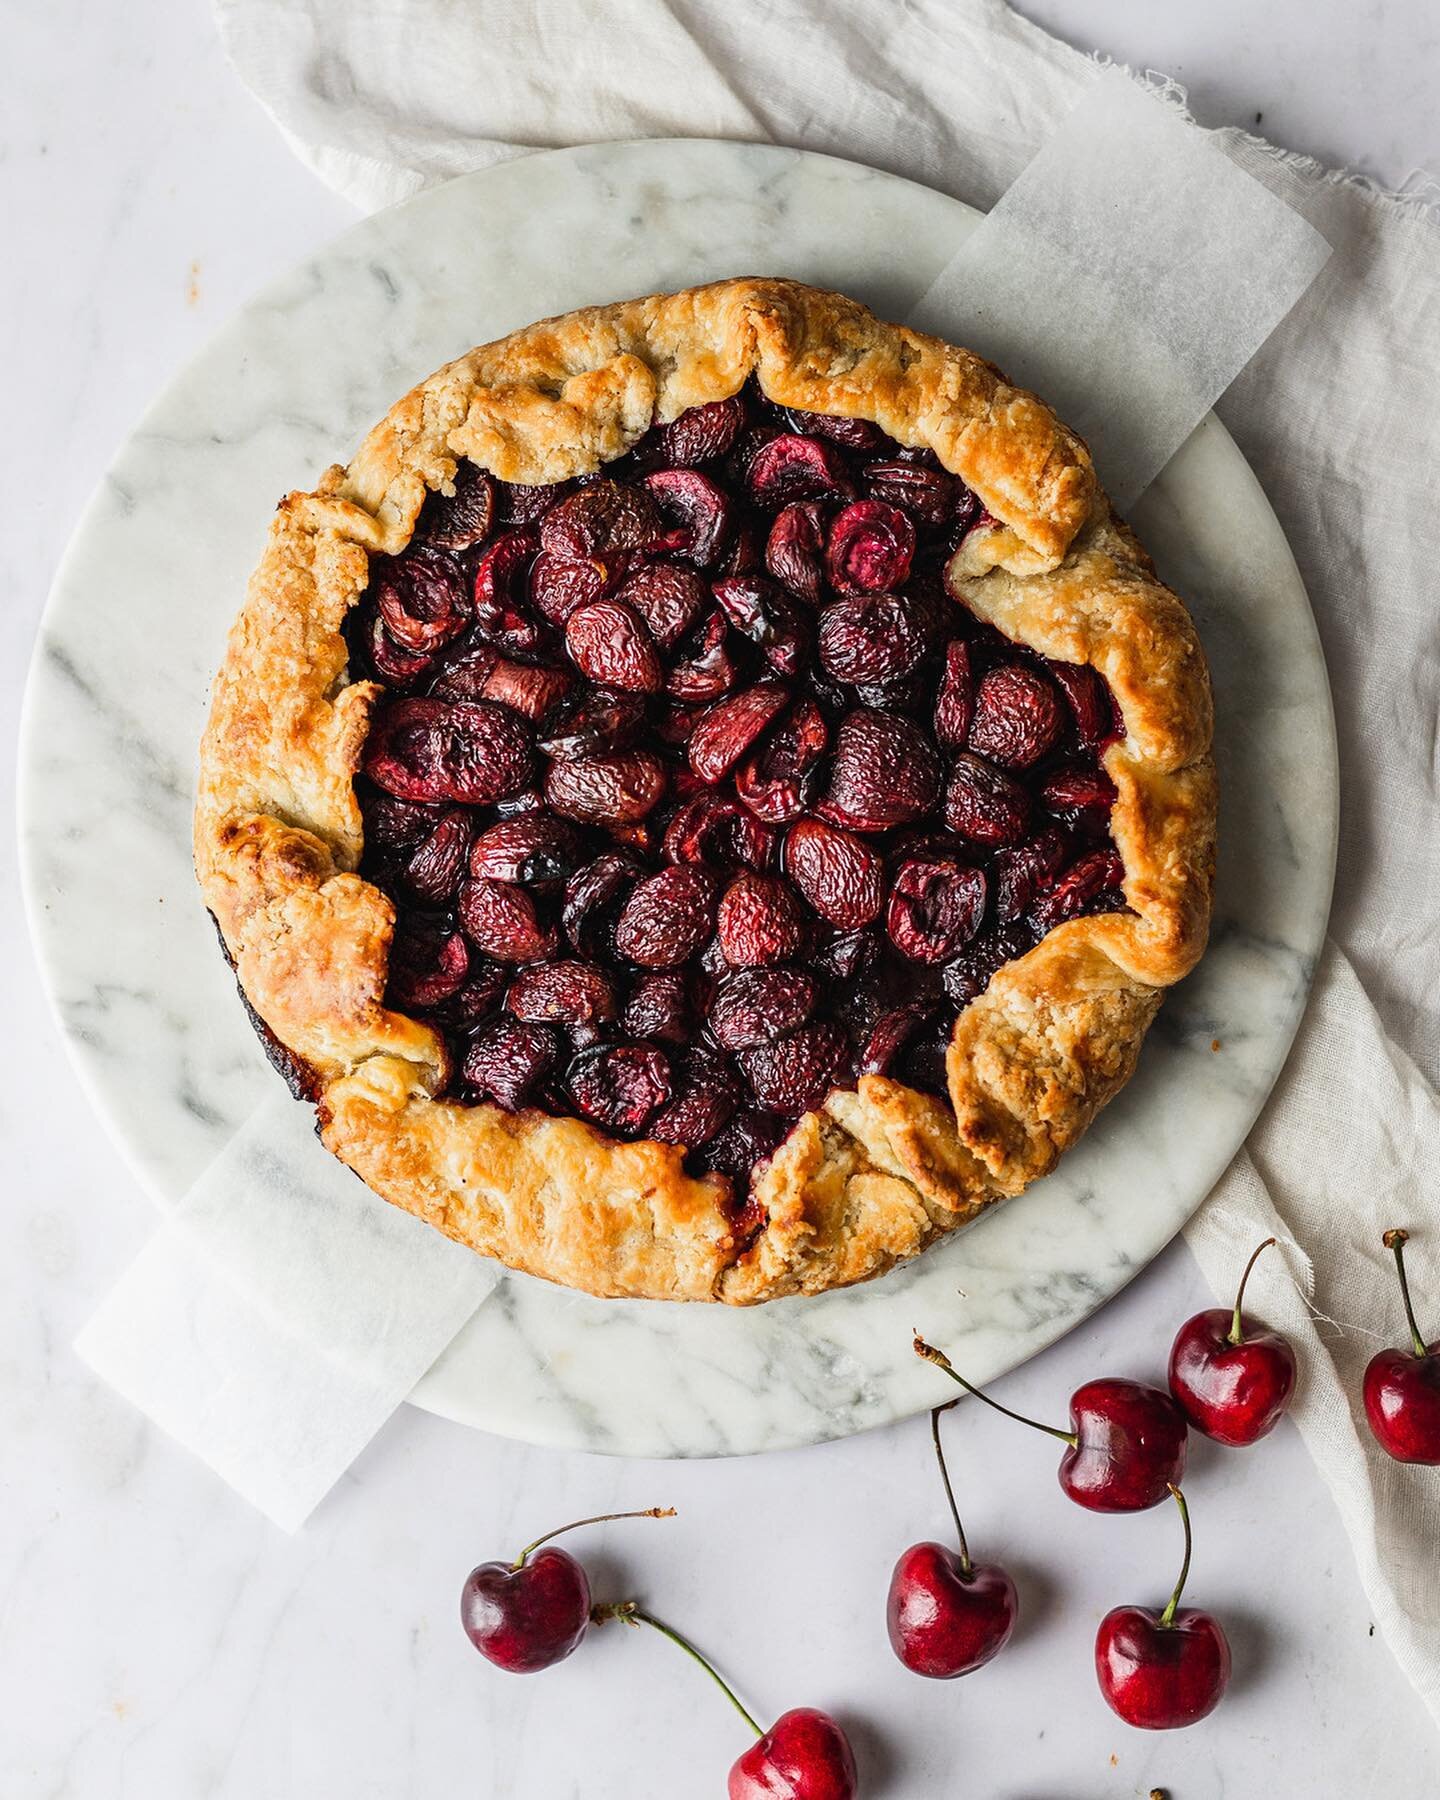 If you're not ready to let go of summer, try this Cherry Skillet Galette recipe, made in partnership with @kana.goods [ad]
⠀⠀⠀⠀⠀⠀⠀⠀⠀
Galettes are like a low-maintenance pie, and this one is particularly easy to put together. The flaky crust features 